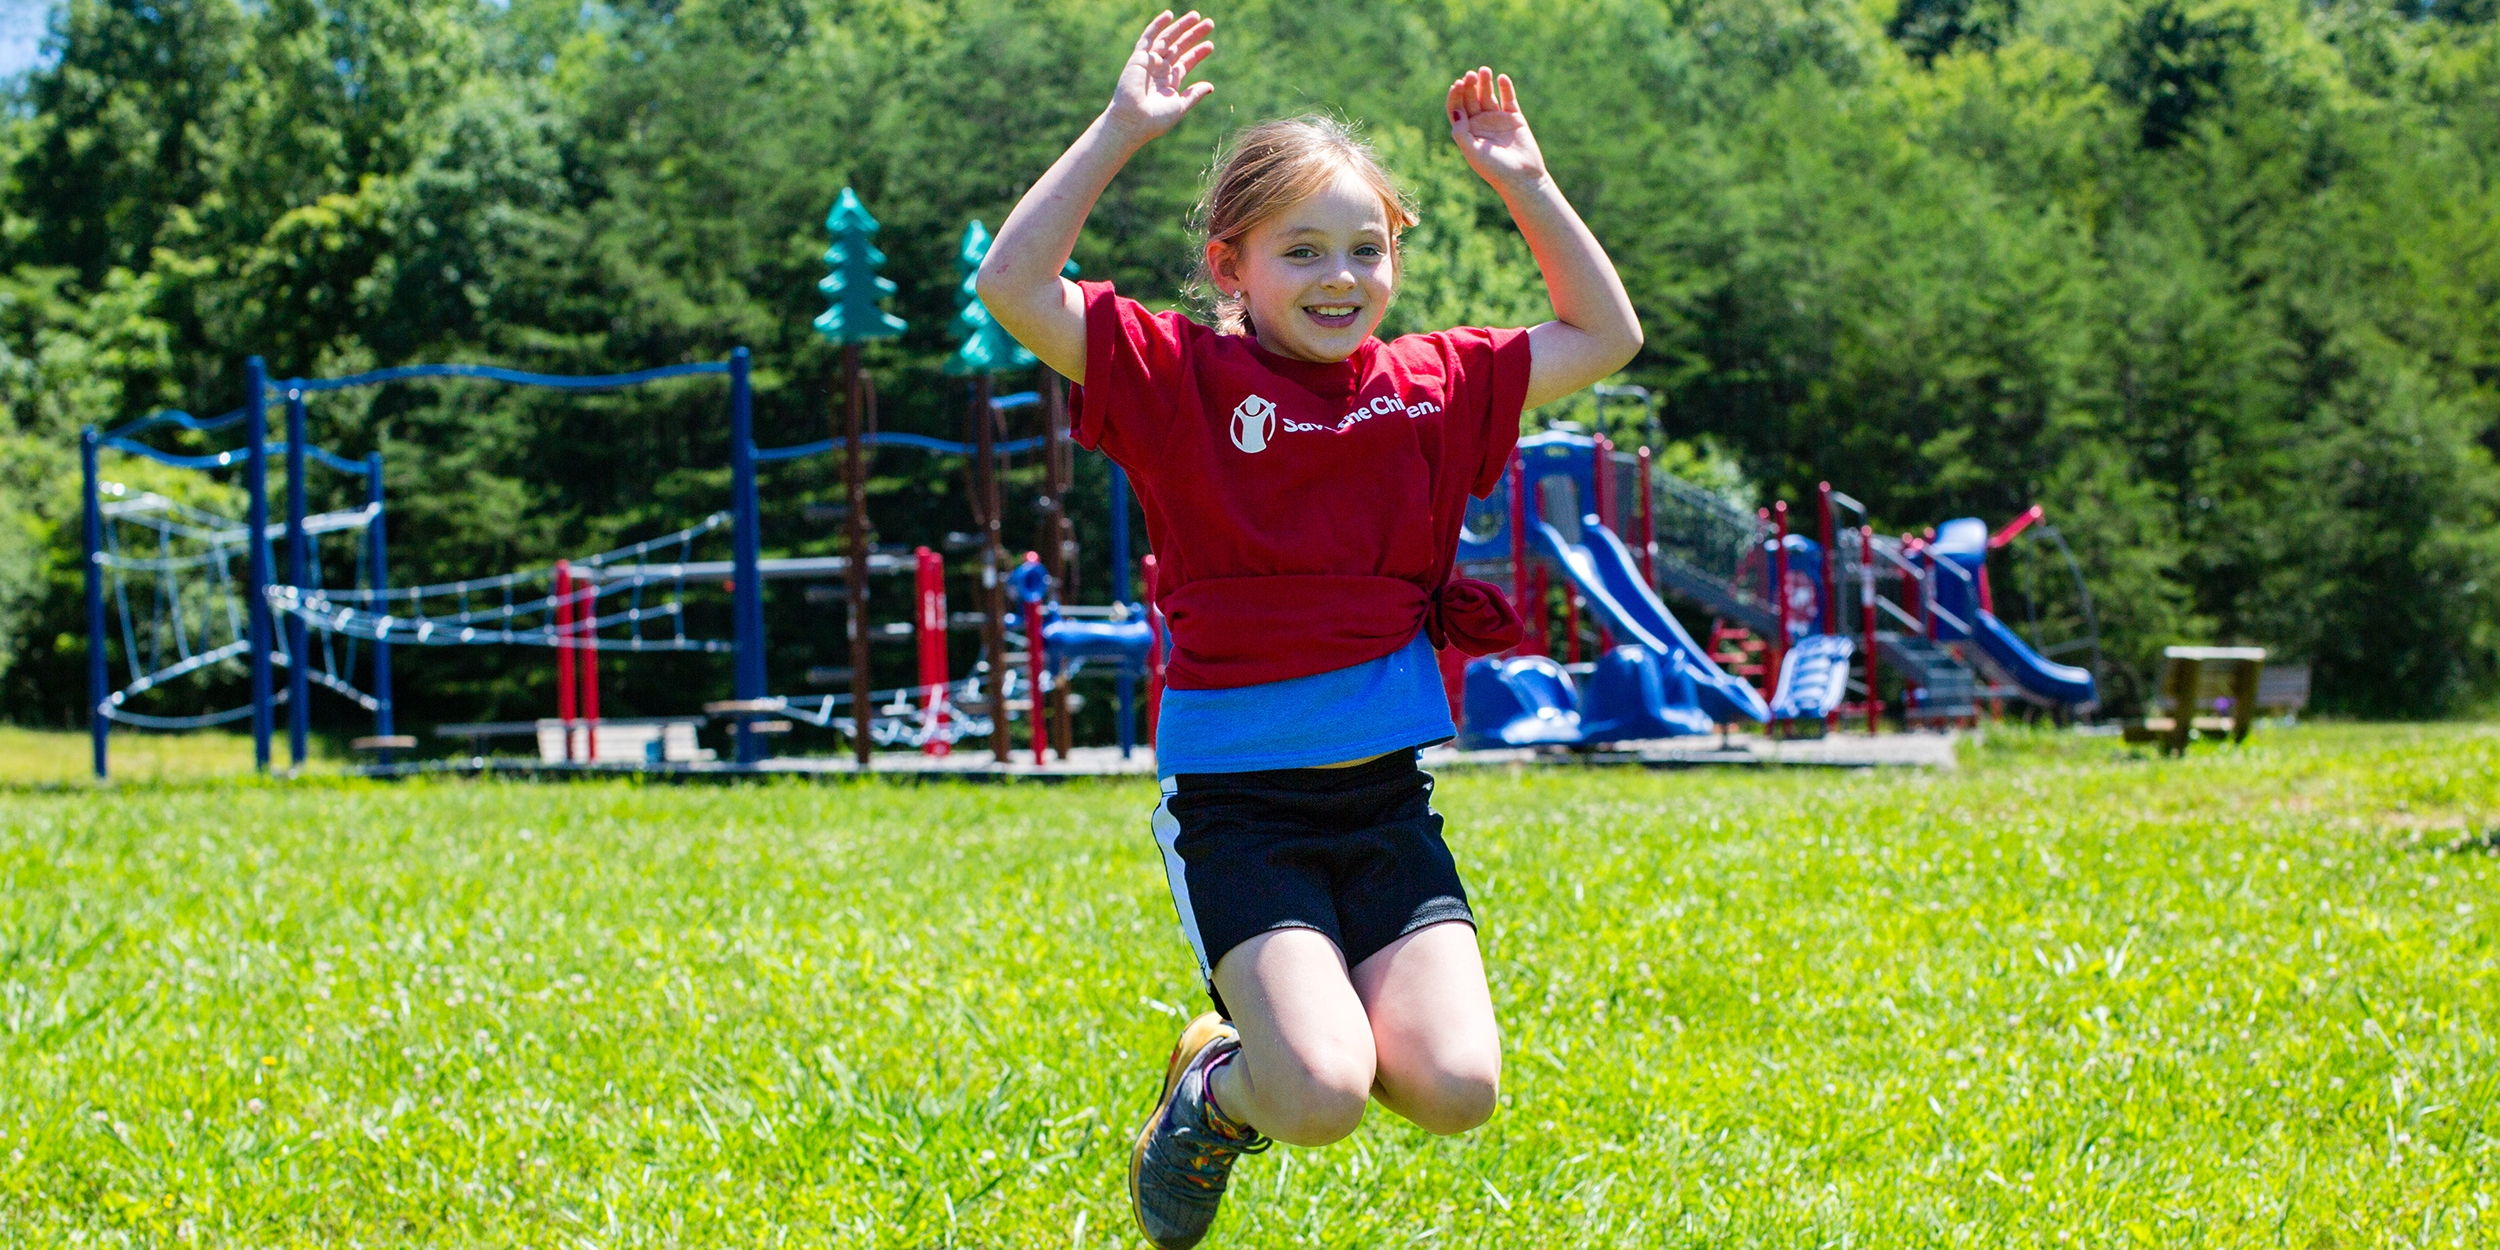 7-year-old Maggie plays outside during recess during Save the Children's SummerBoost Camp in Tennessee. Photo credit: Save the Children, June 2017.